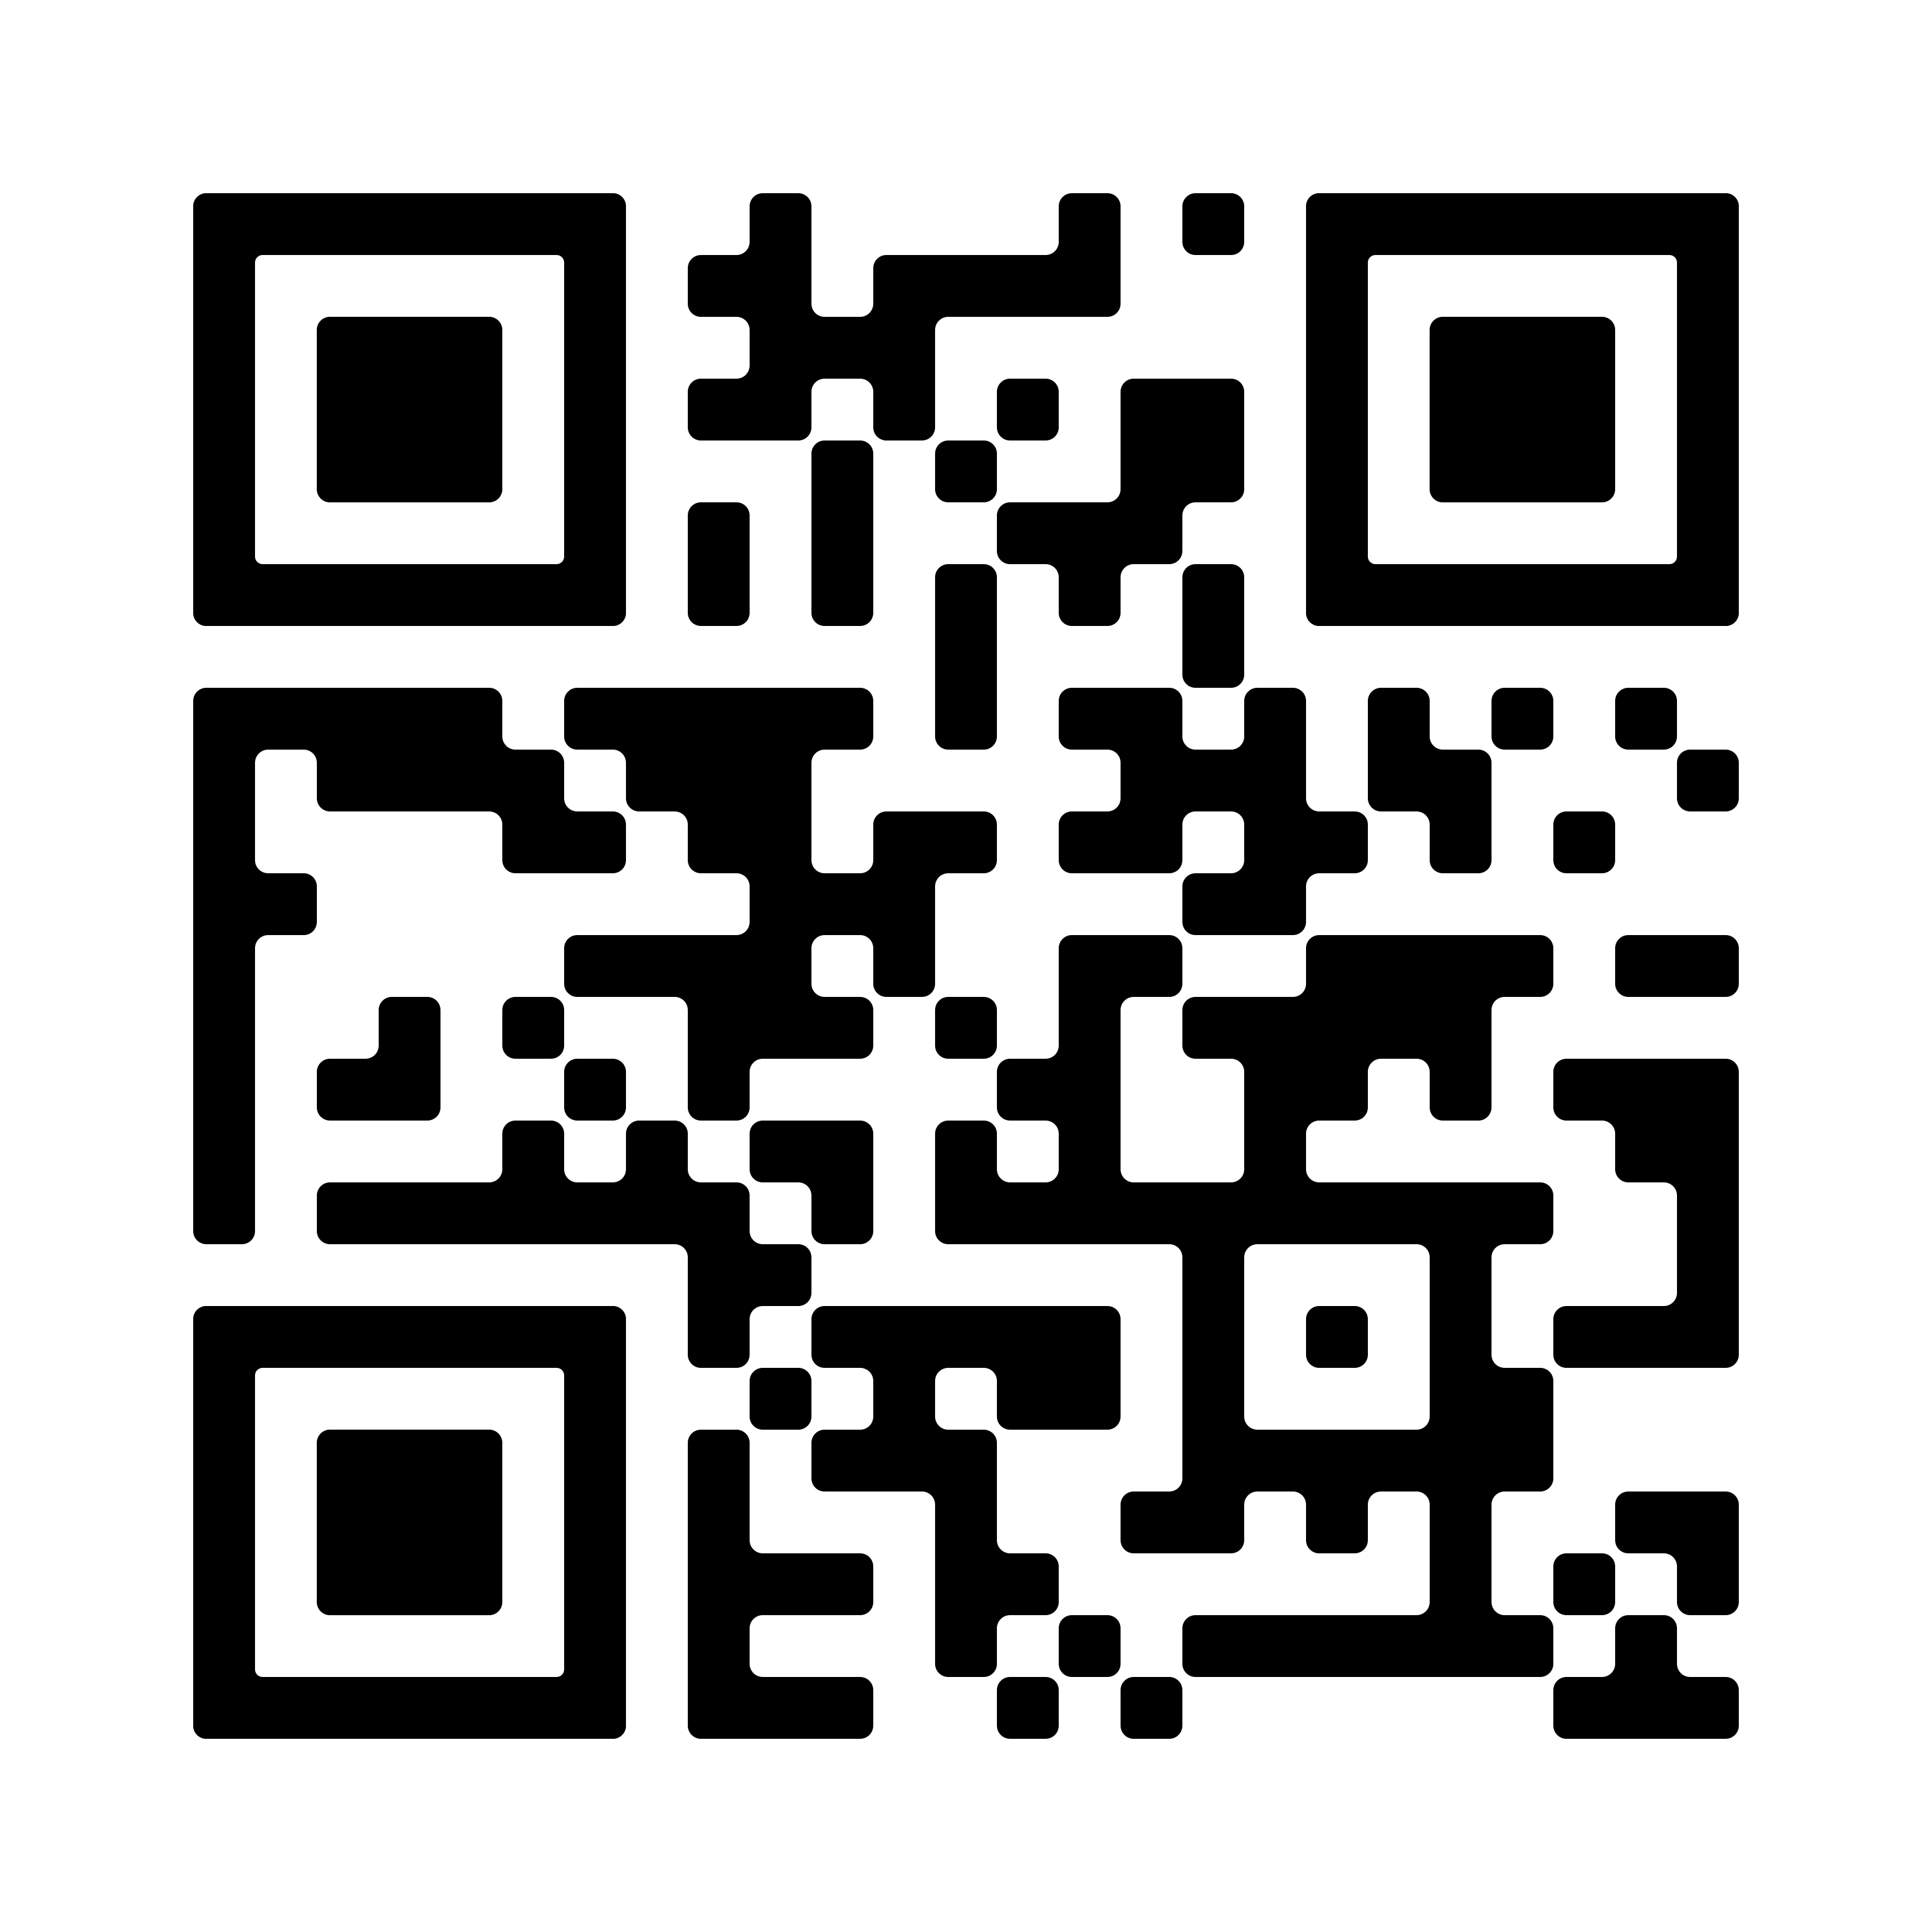 QR code to download Handshake app on IOS and Android